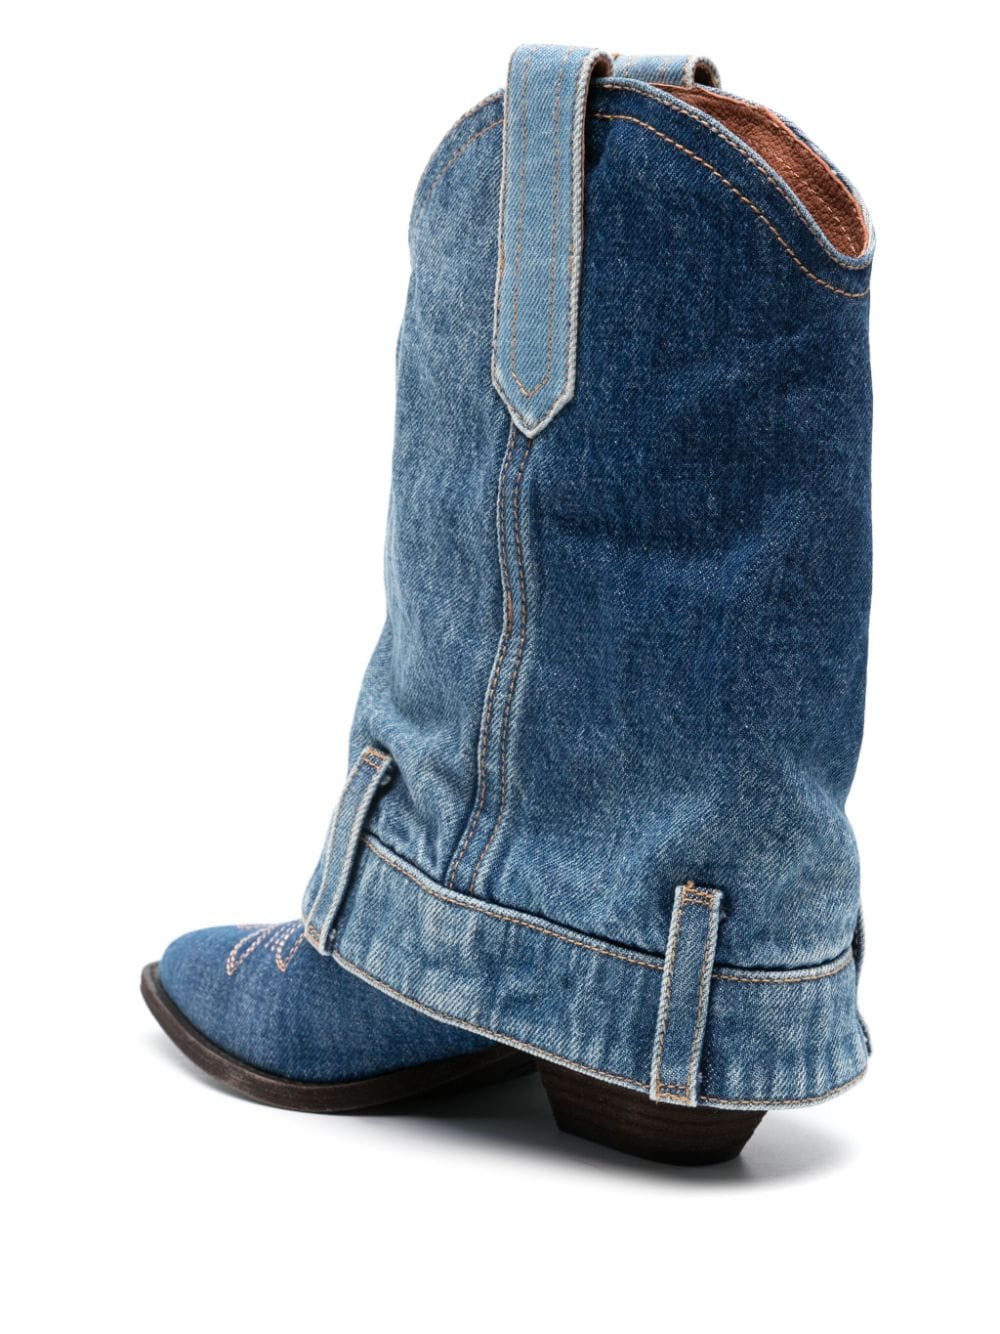 Western-style boots with zip design